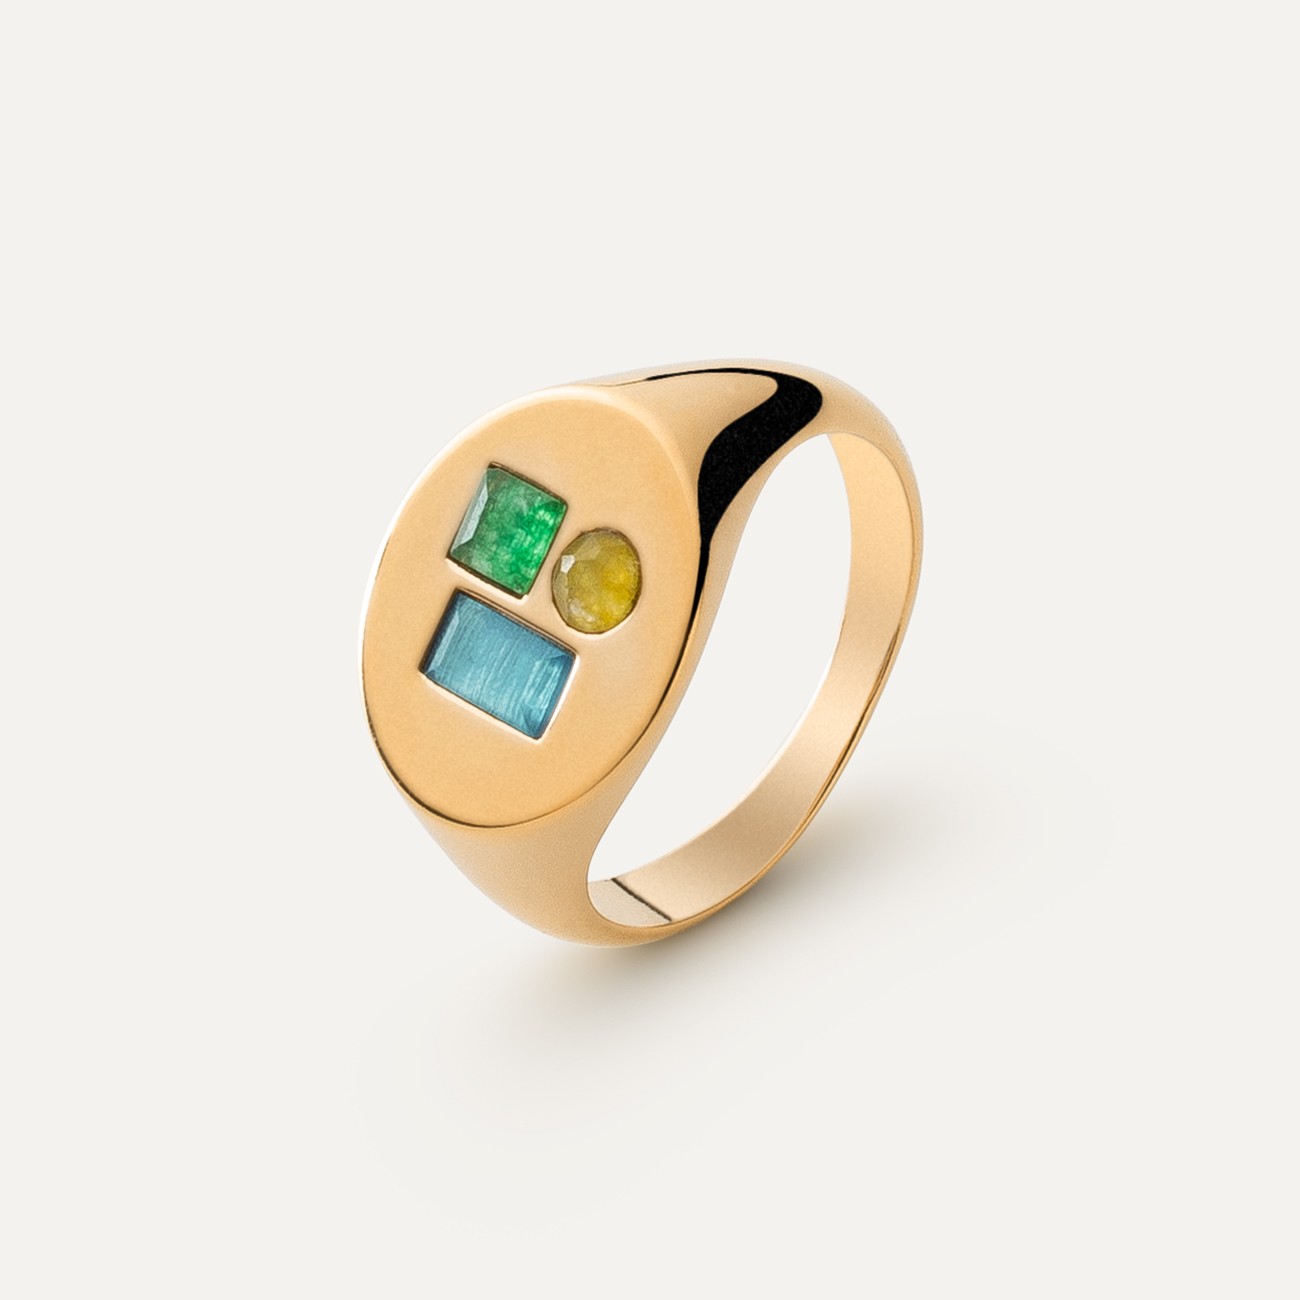 Signet ring with a colorful stones